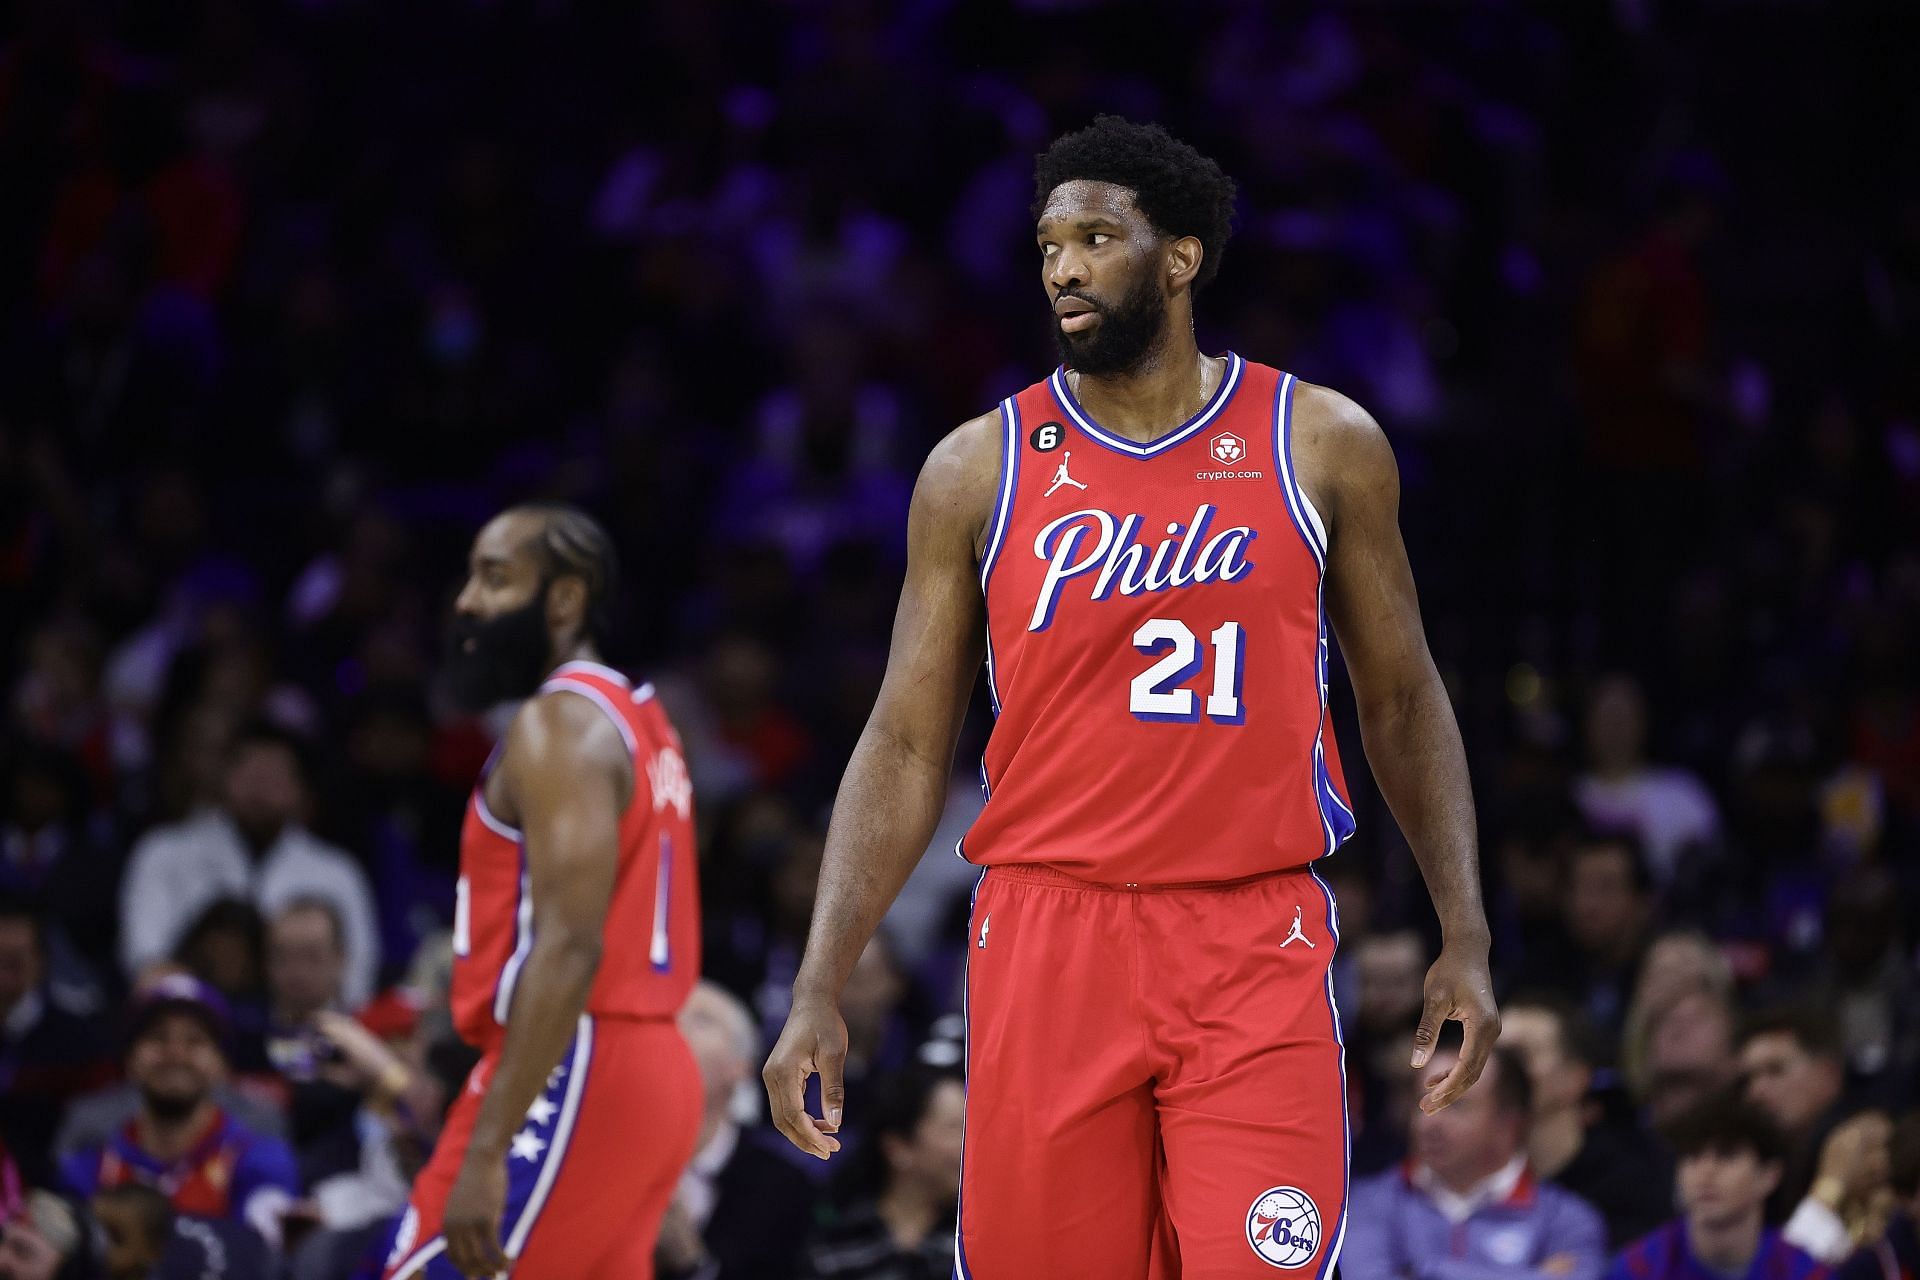 SIXERS NOTES: Fans responding to Joel Embiid